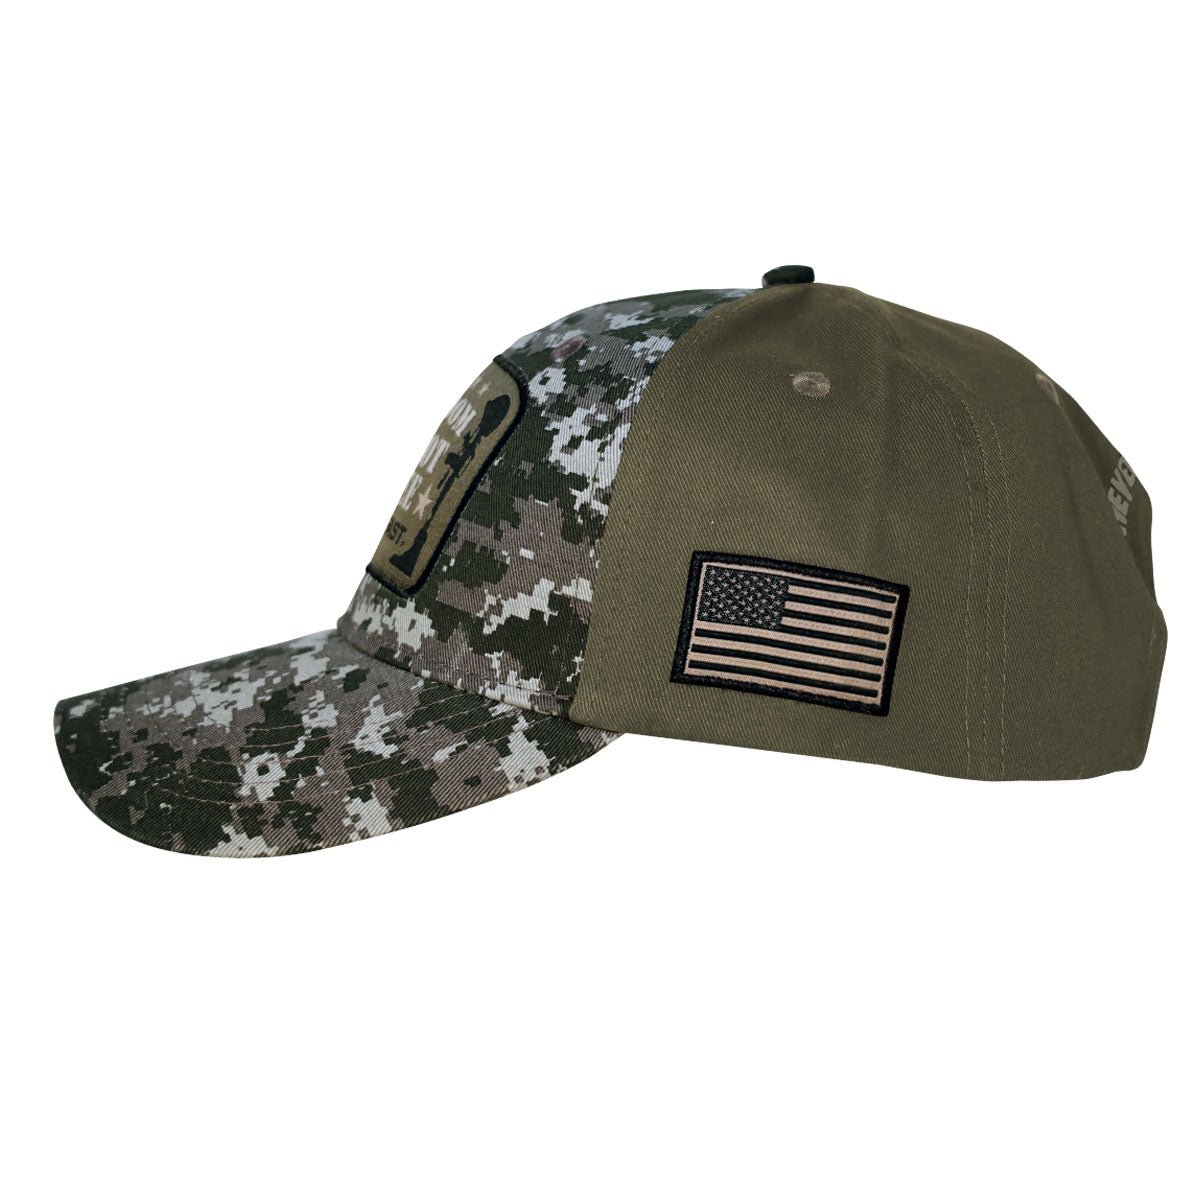 Freedom Is Not Free Mens Cap